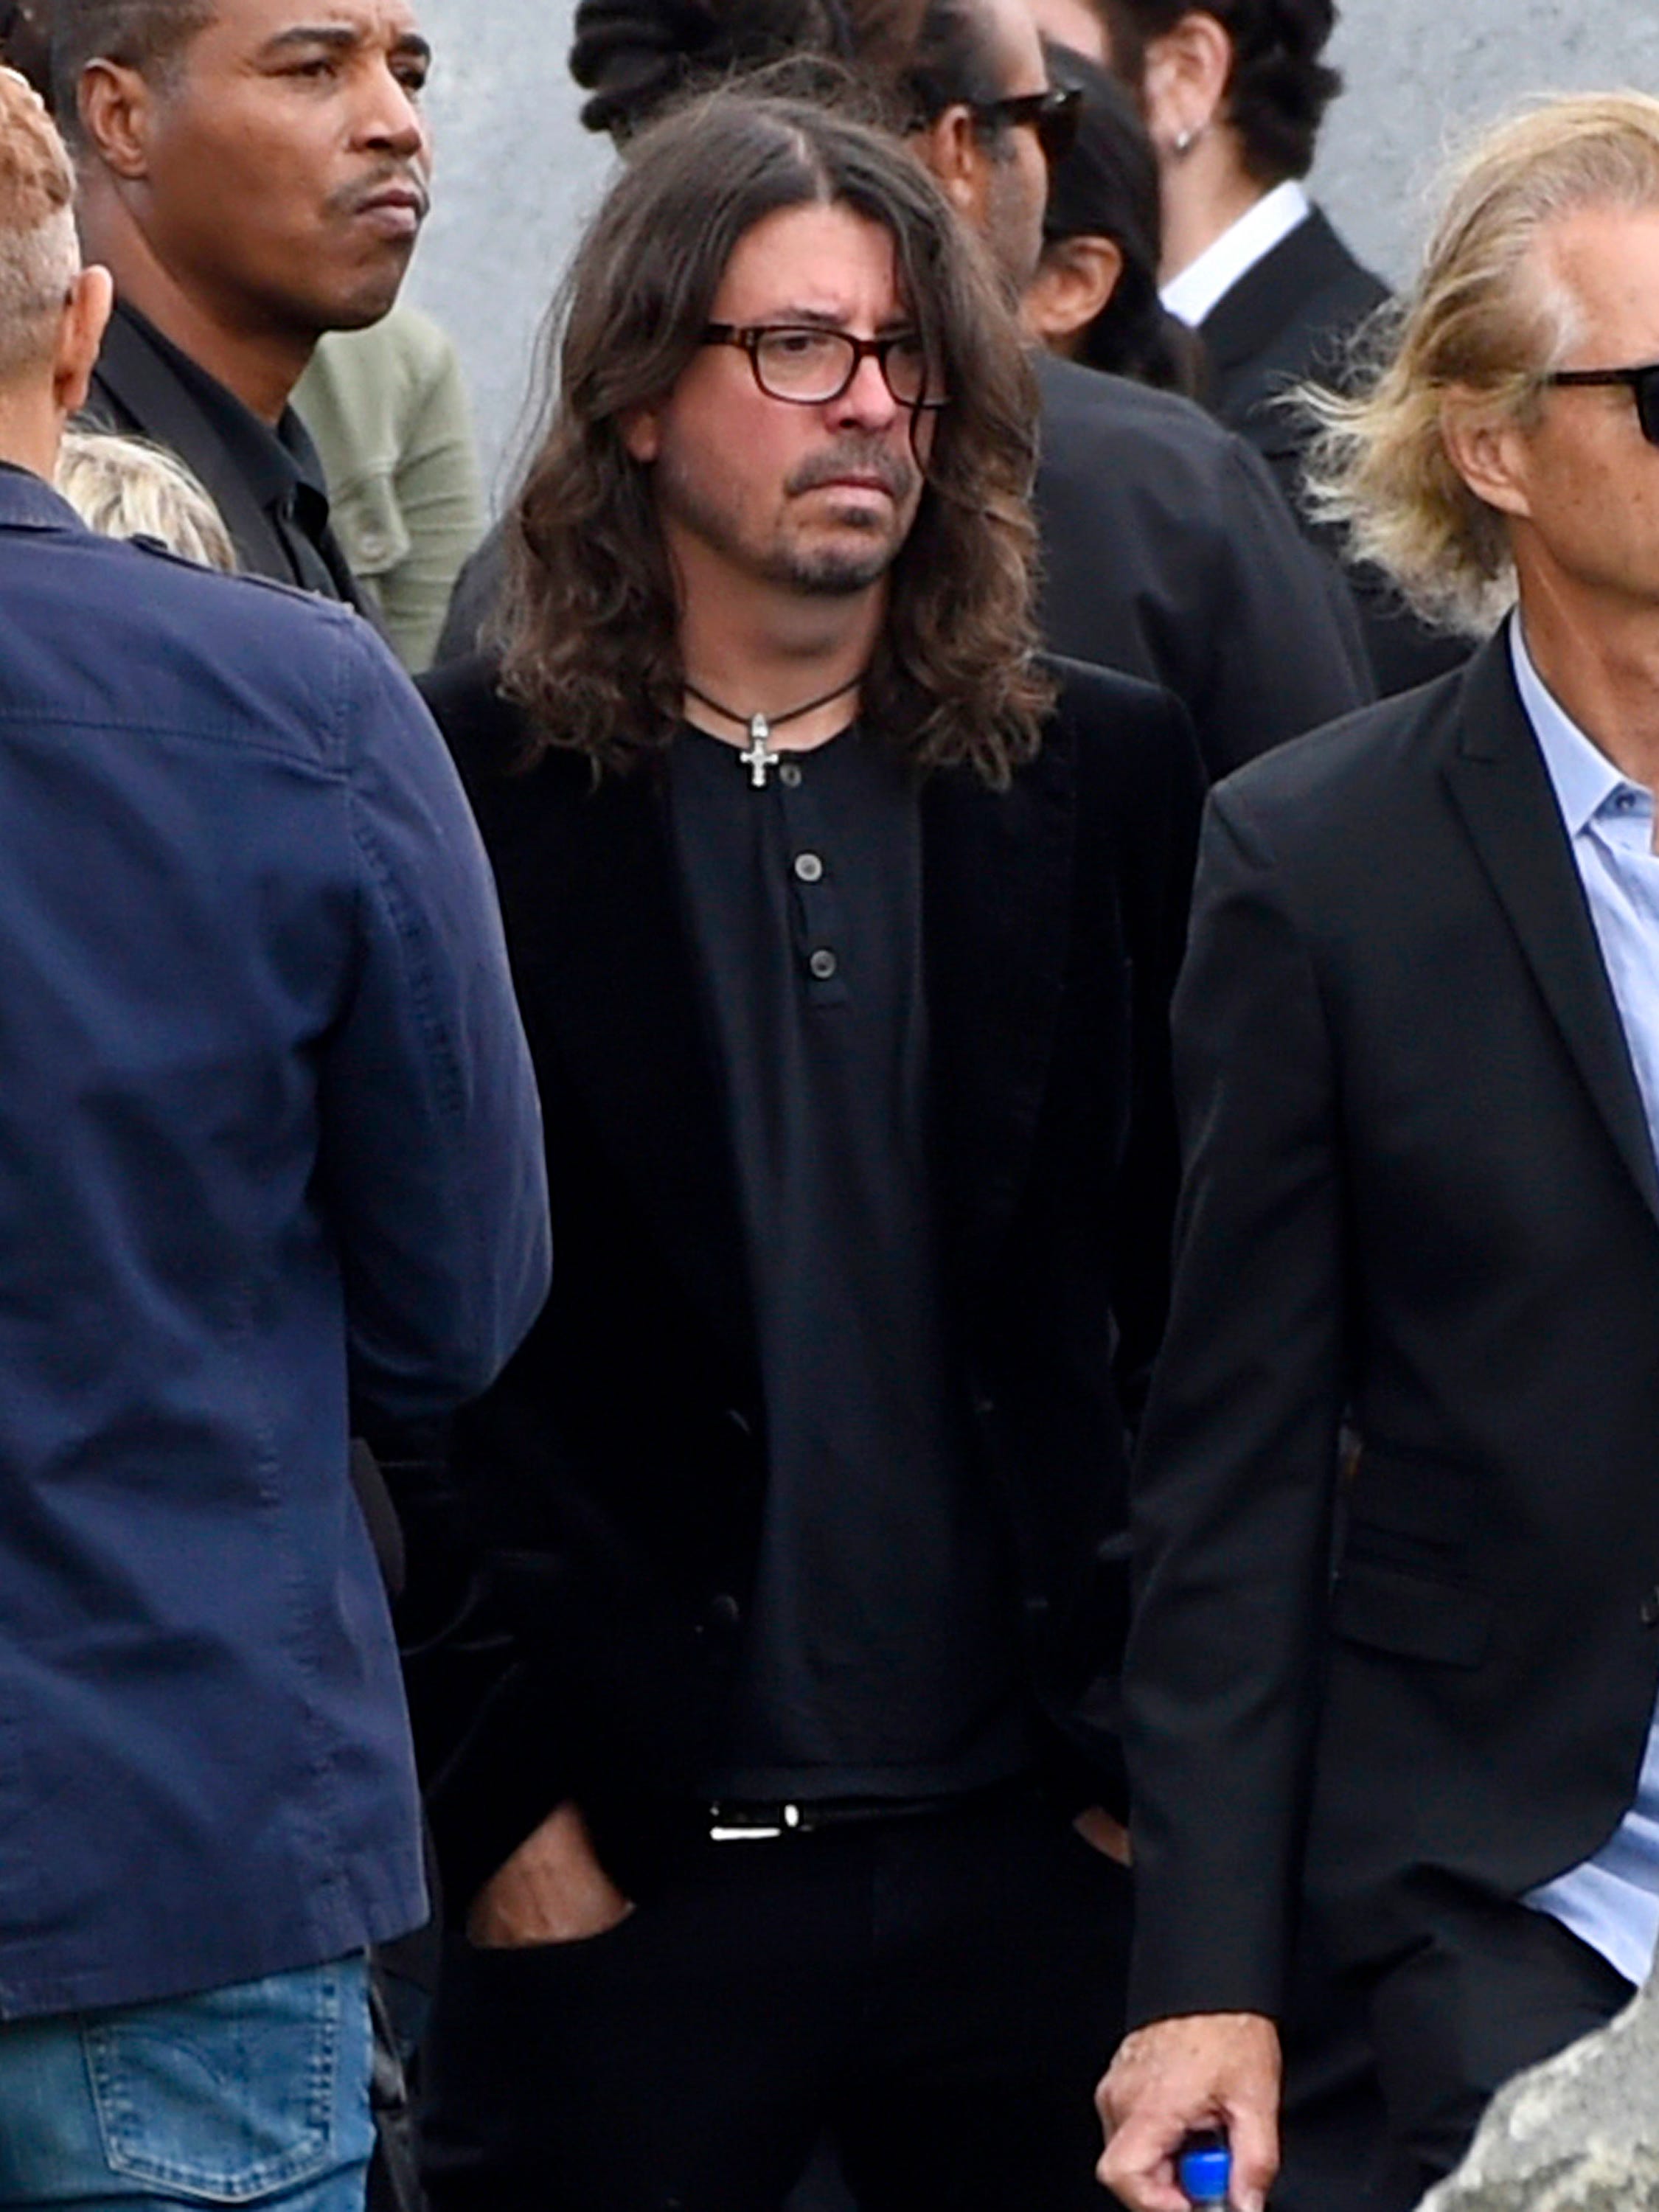 Dave Grohl, of the Foo Fighters, attends a funeral for Chris Cornell at the Hollywood Forever Cemetery on Friday, May 26, 2017, in Los Angeles.